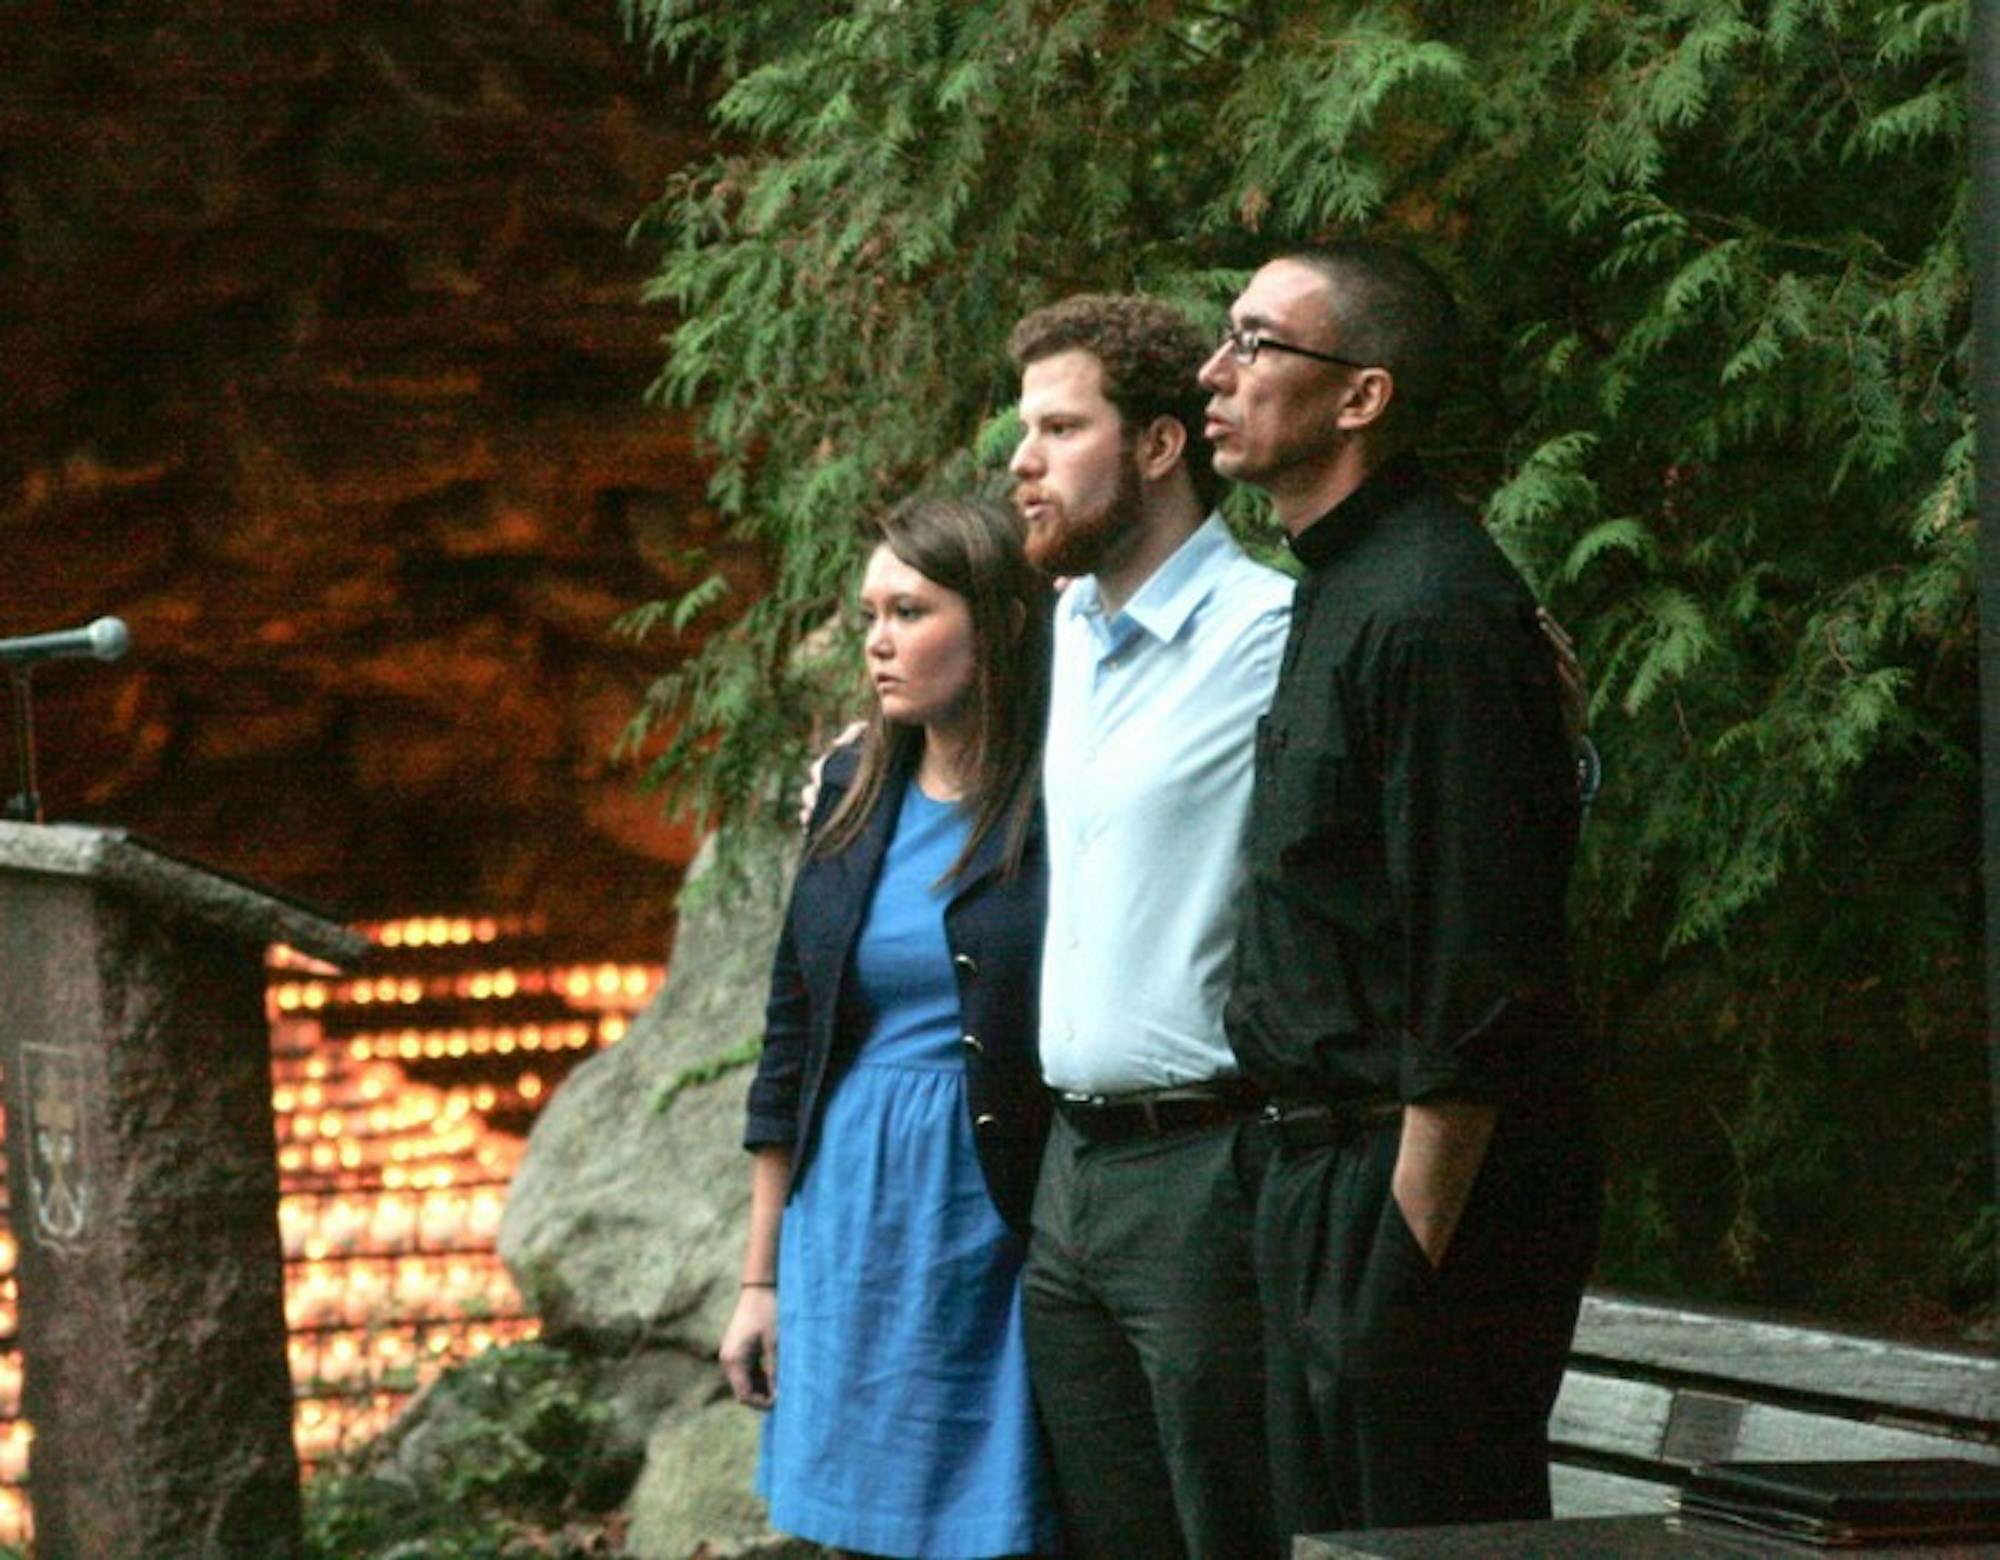 Nancy Joyce, Alex Coccia and Fr. Pete McCormick lead a prayer service Sept. 22, 2013, in response to a sexual assault report.